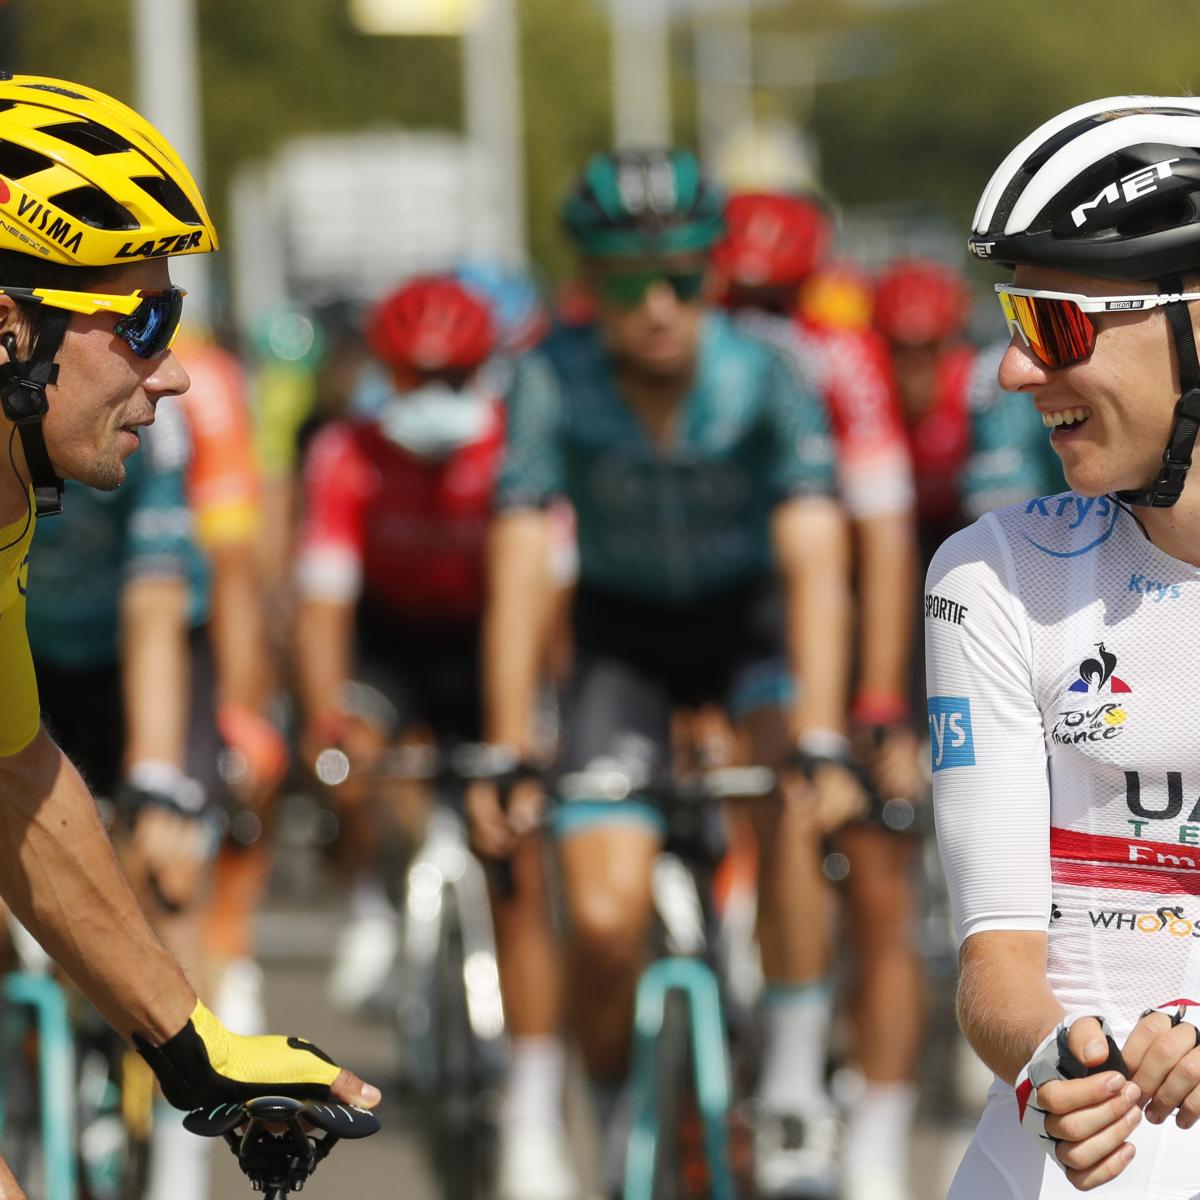 Tour de France 2020: Stage 20 Winner, Highlights, Updated Standings